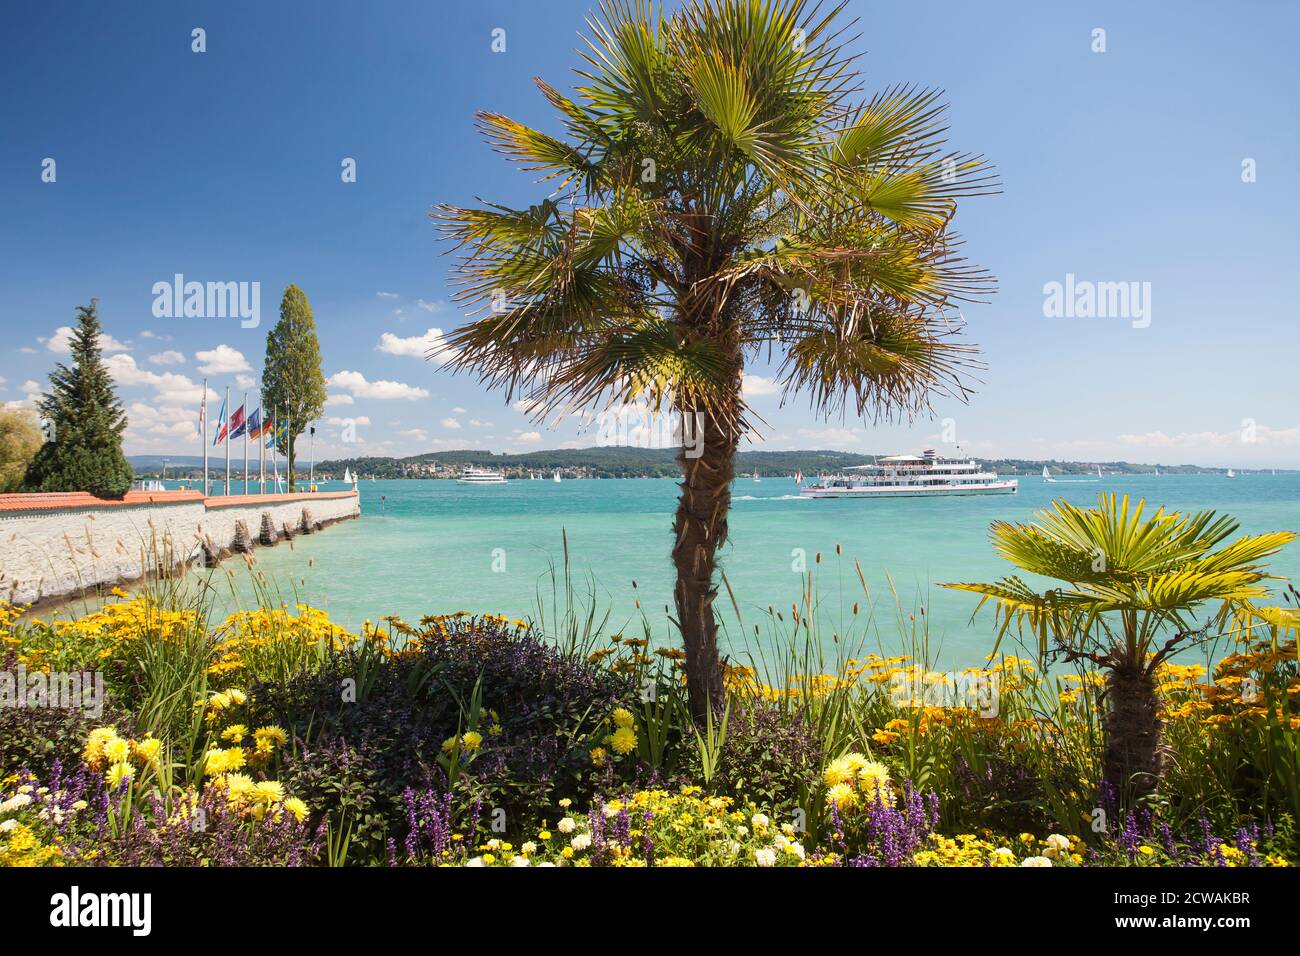 Palm trees with blooming flowers, spring, Mainau Island, Flower Island, Constance, Lake Constance, Baden-Württemberg, Germany, Europe Stock Photo